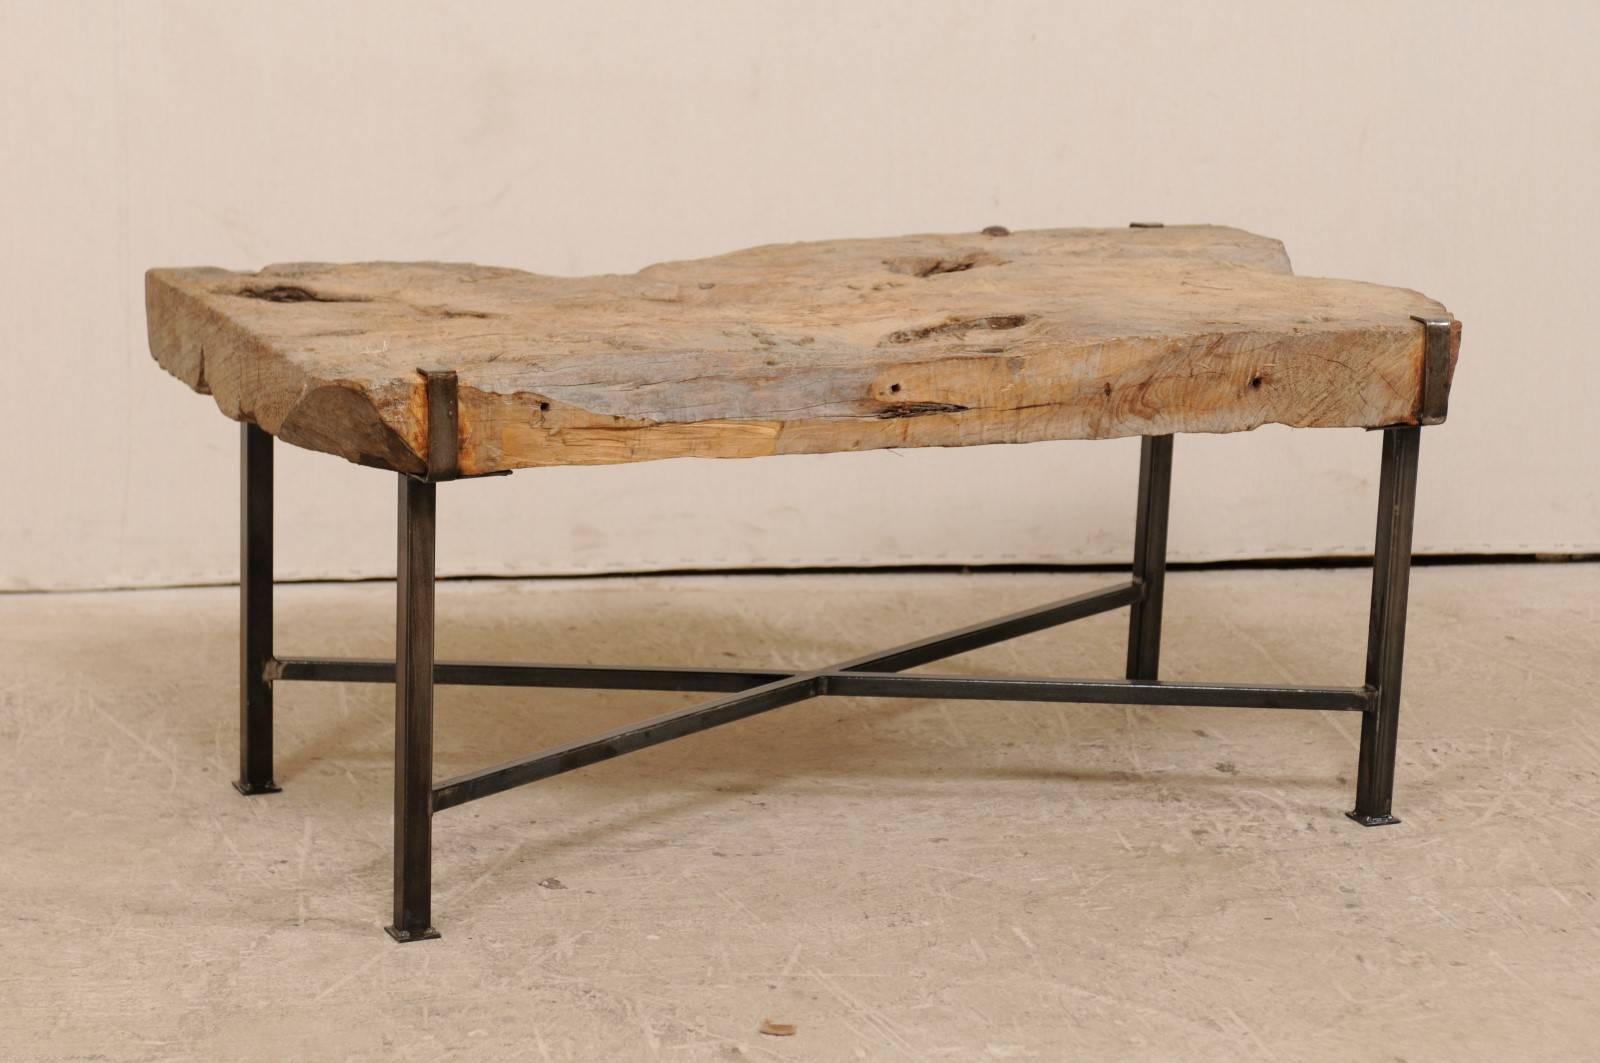 A 19th century Spanish wood slab coffee table on custom base. This coffee table has been fashioned from a 19th century Spanish thickly cut wood slab on a newer custom iron base. The slab top is supported by a custom black iron base, with four